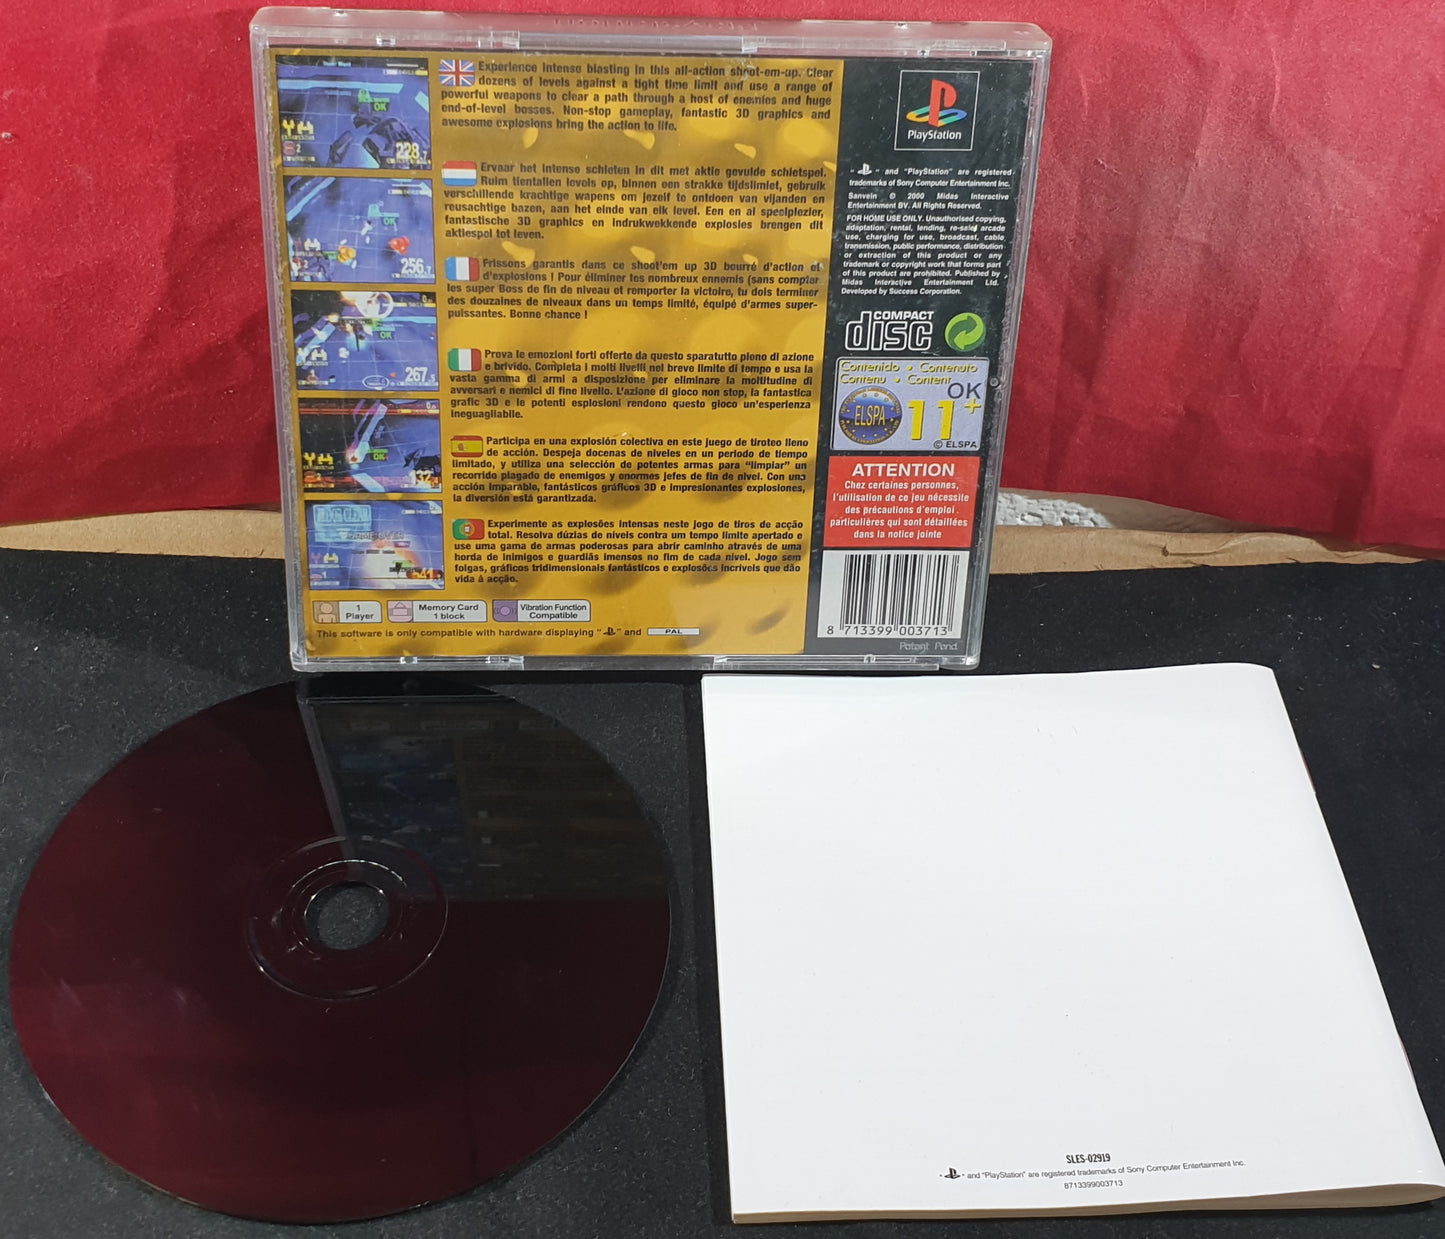 Sanvein Sony Playstation 1 (PS1) Game